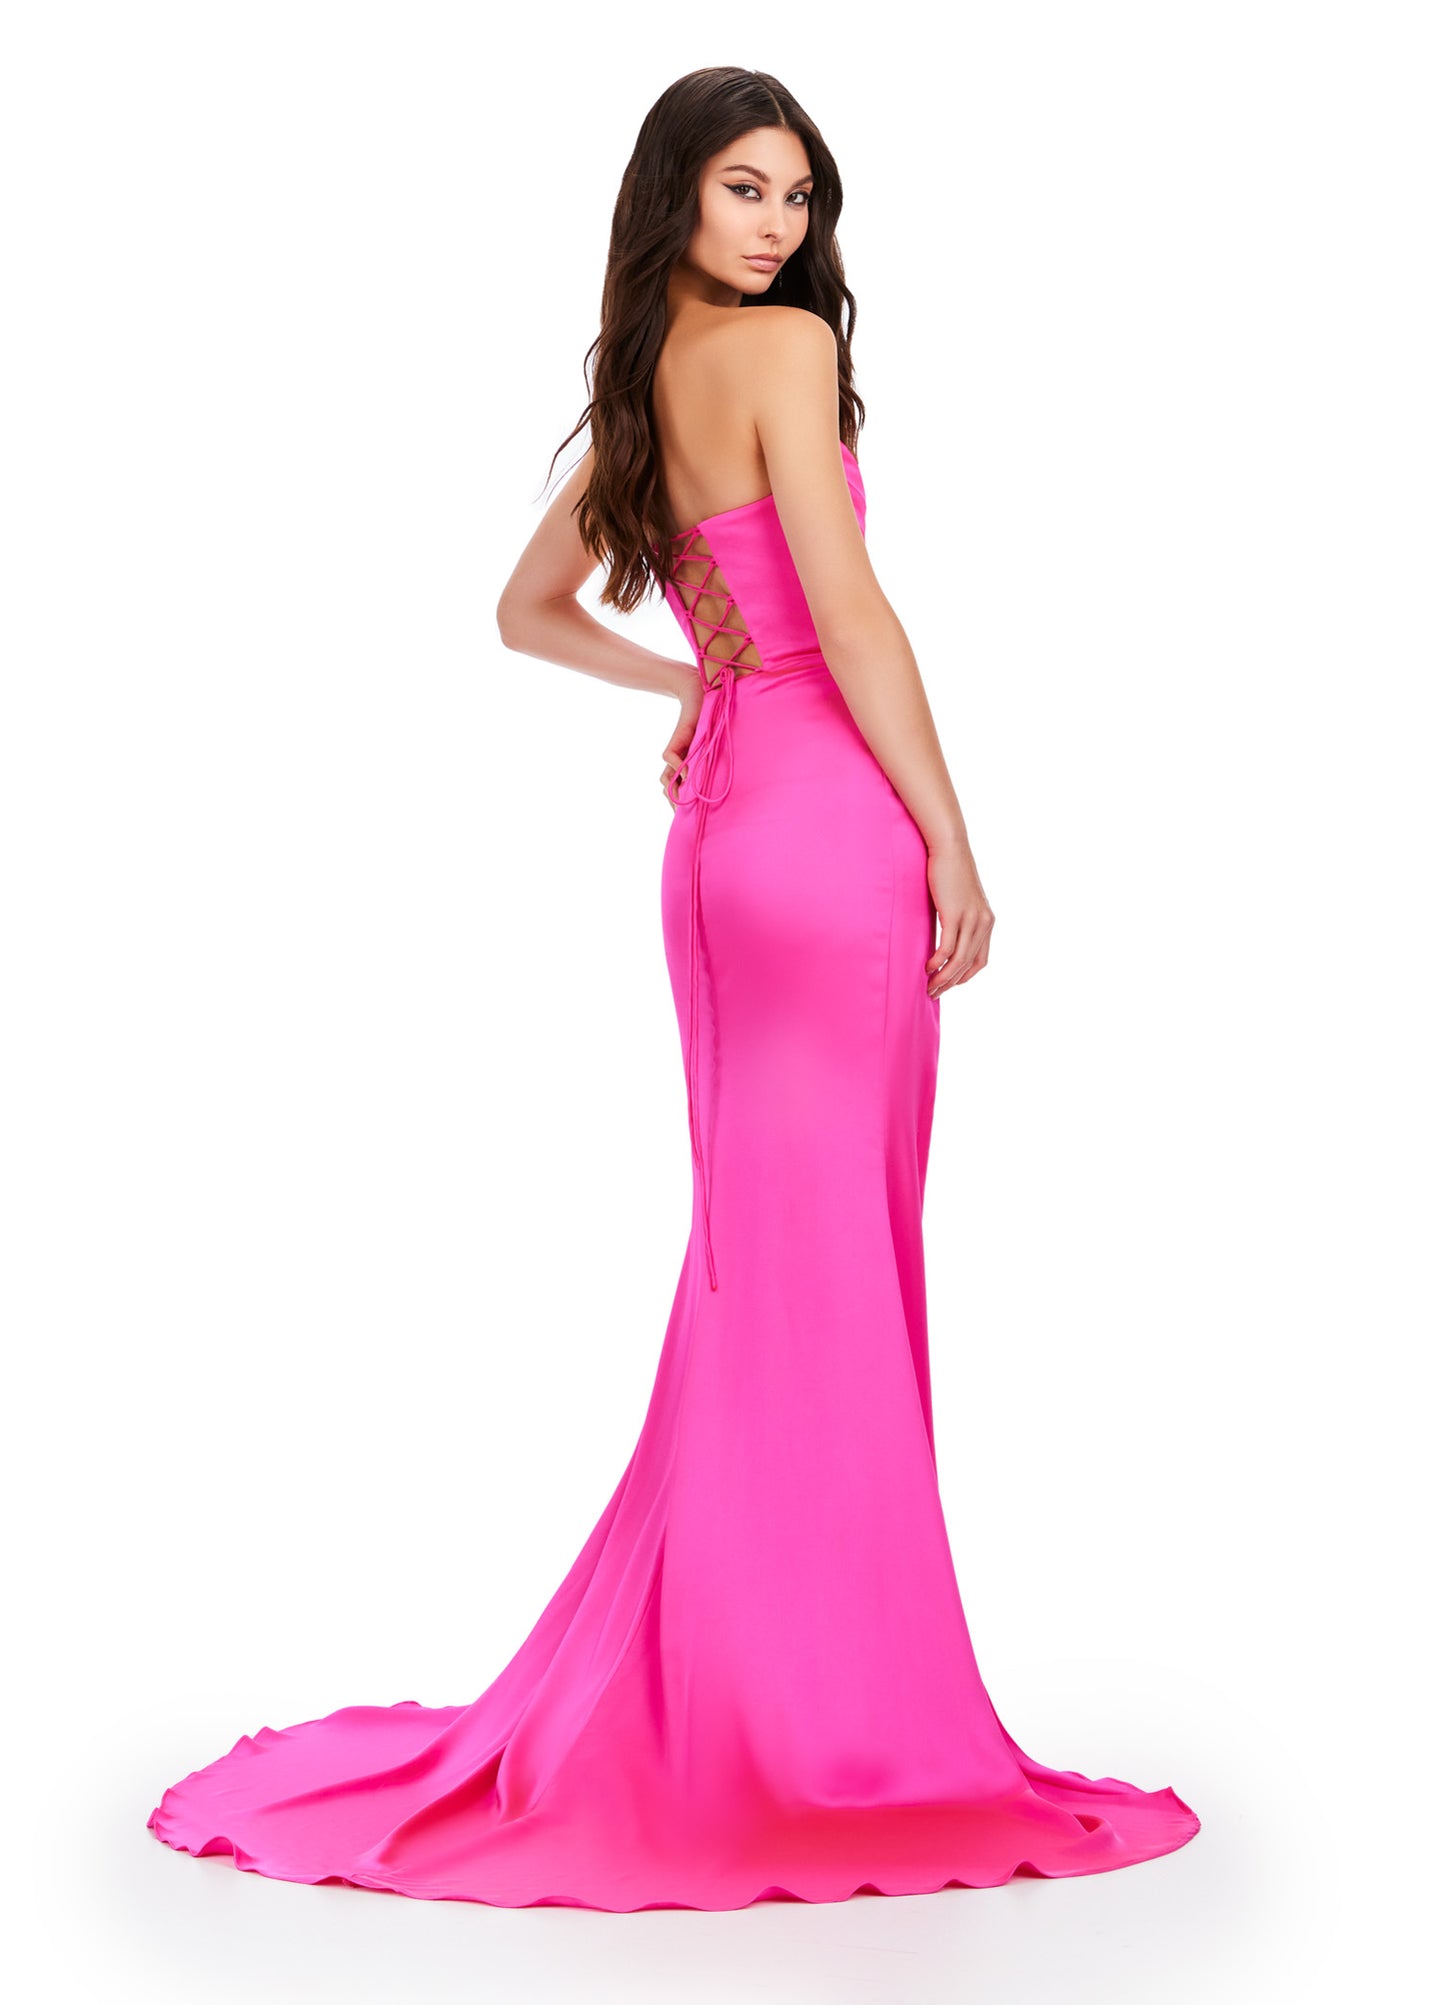 Get ready to make a statement in the Ashley Lauren 11605 Long Prom Dress. This stunning gown features a strapless sweetheart neckline and a satin material that will hug your curves in all the right places. The lace-up back and thigh-high slit add a touch of drama and sophistication. Stand out at your next formal event with this elegant and stylish prom dress. A timeless classic! This strapless satin dress features ruched detail throughout. The lace up back and right leg slit complete the look.